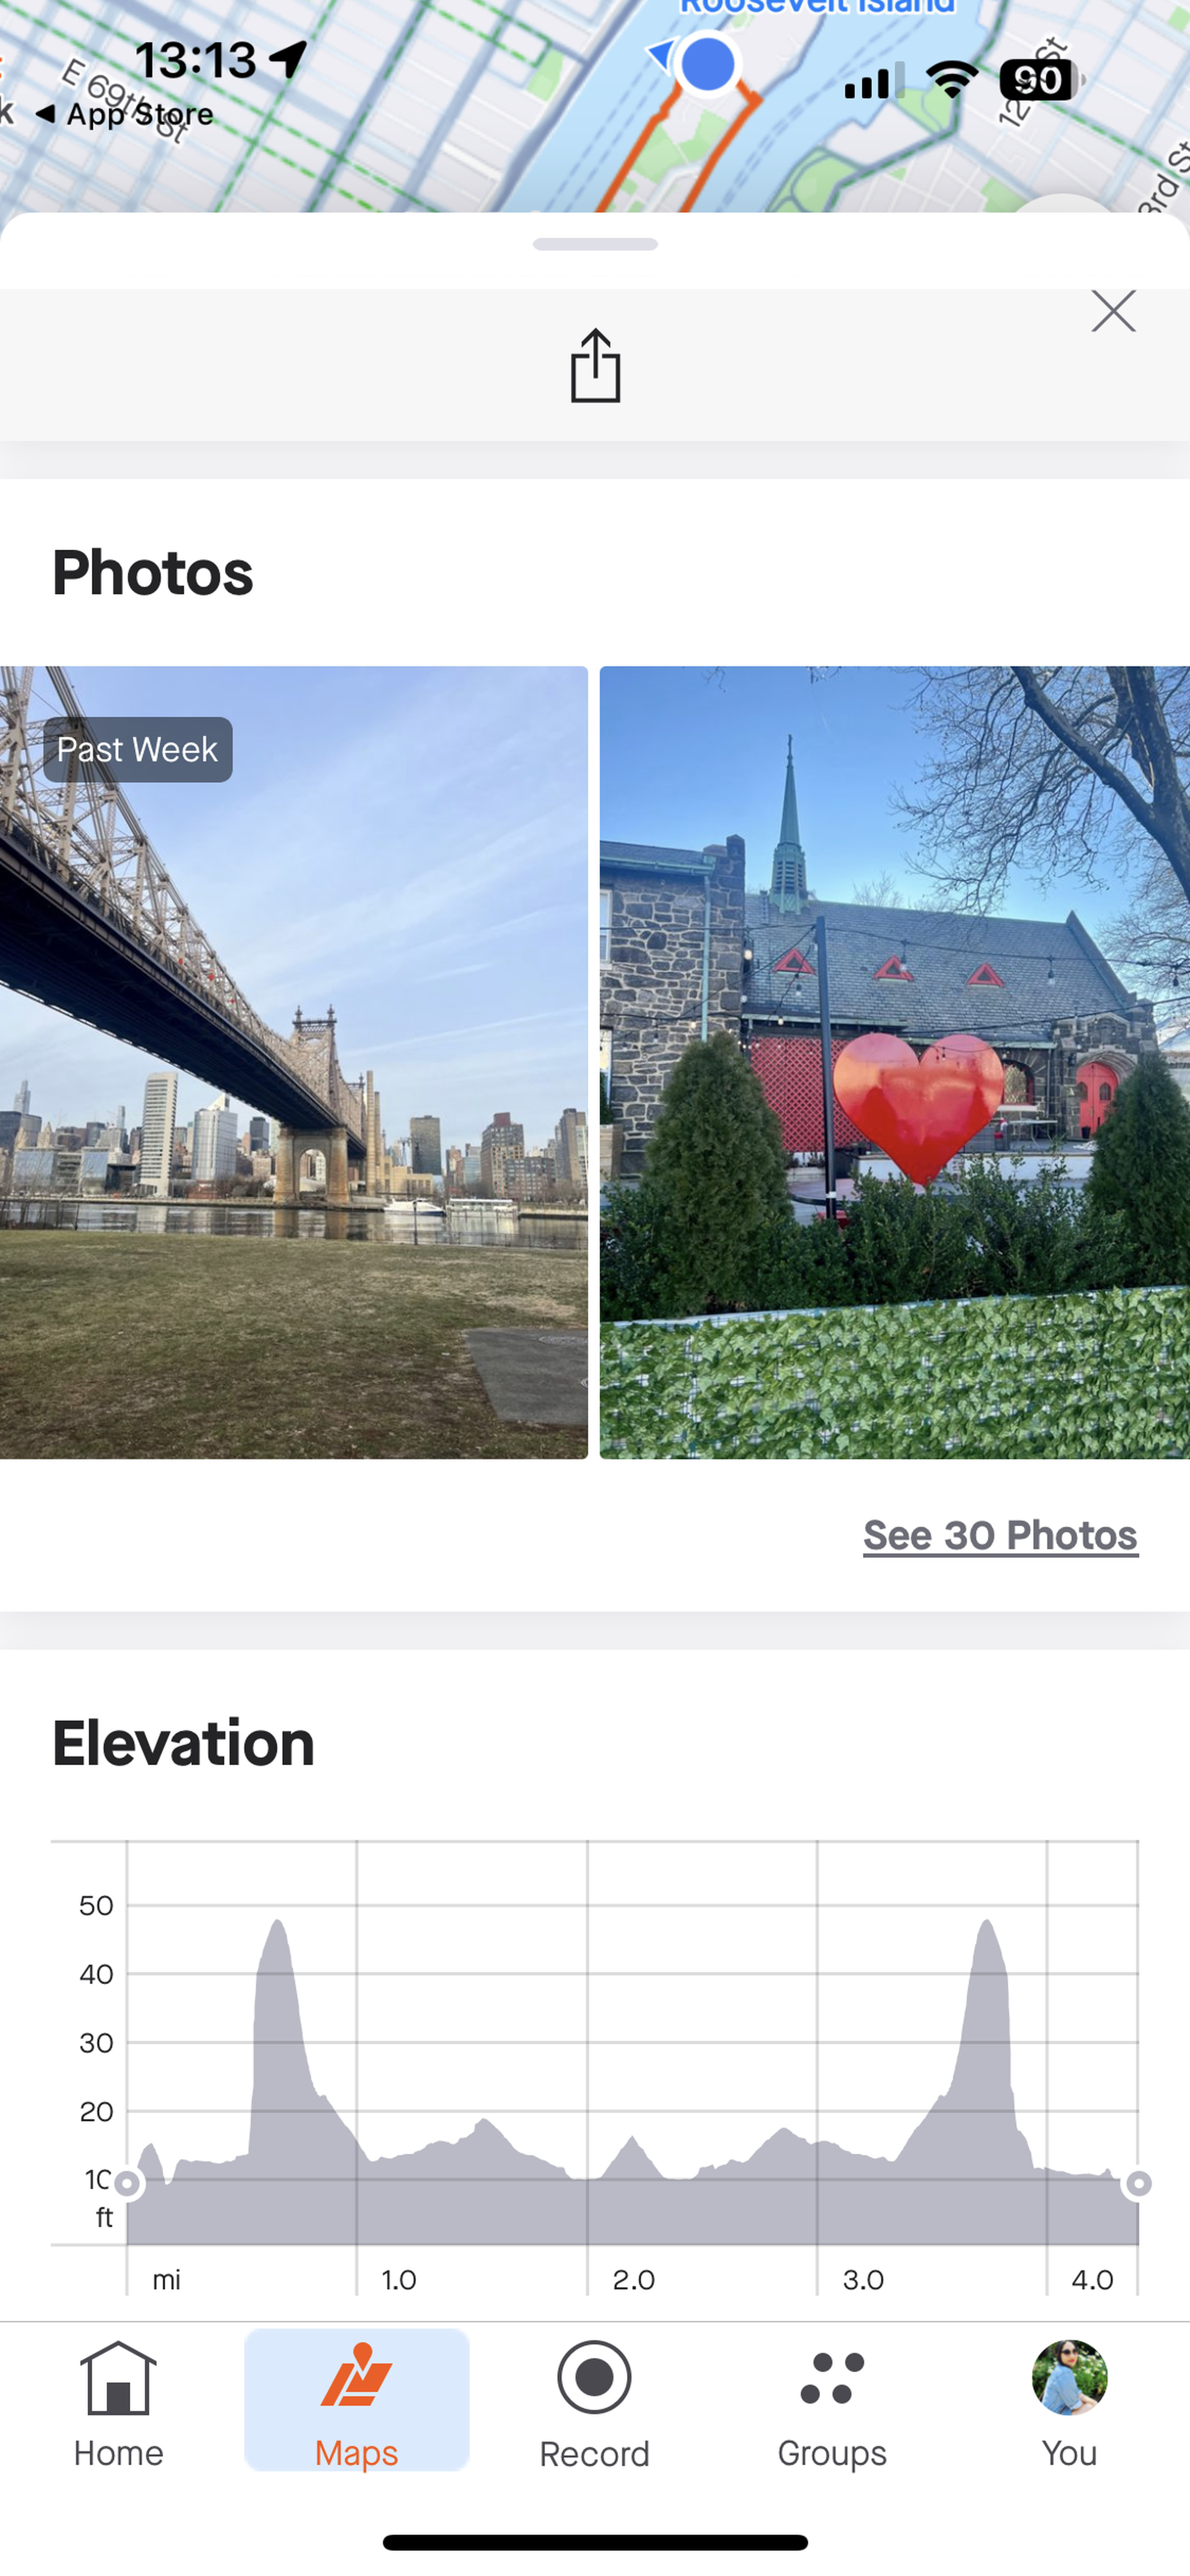 Screenshot of recommended routes photos showing a building with a big metal heart in front of it.